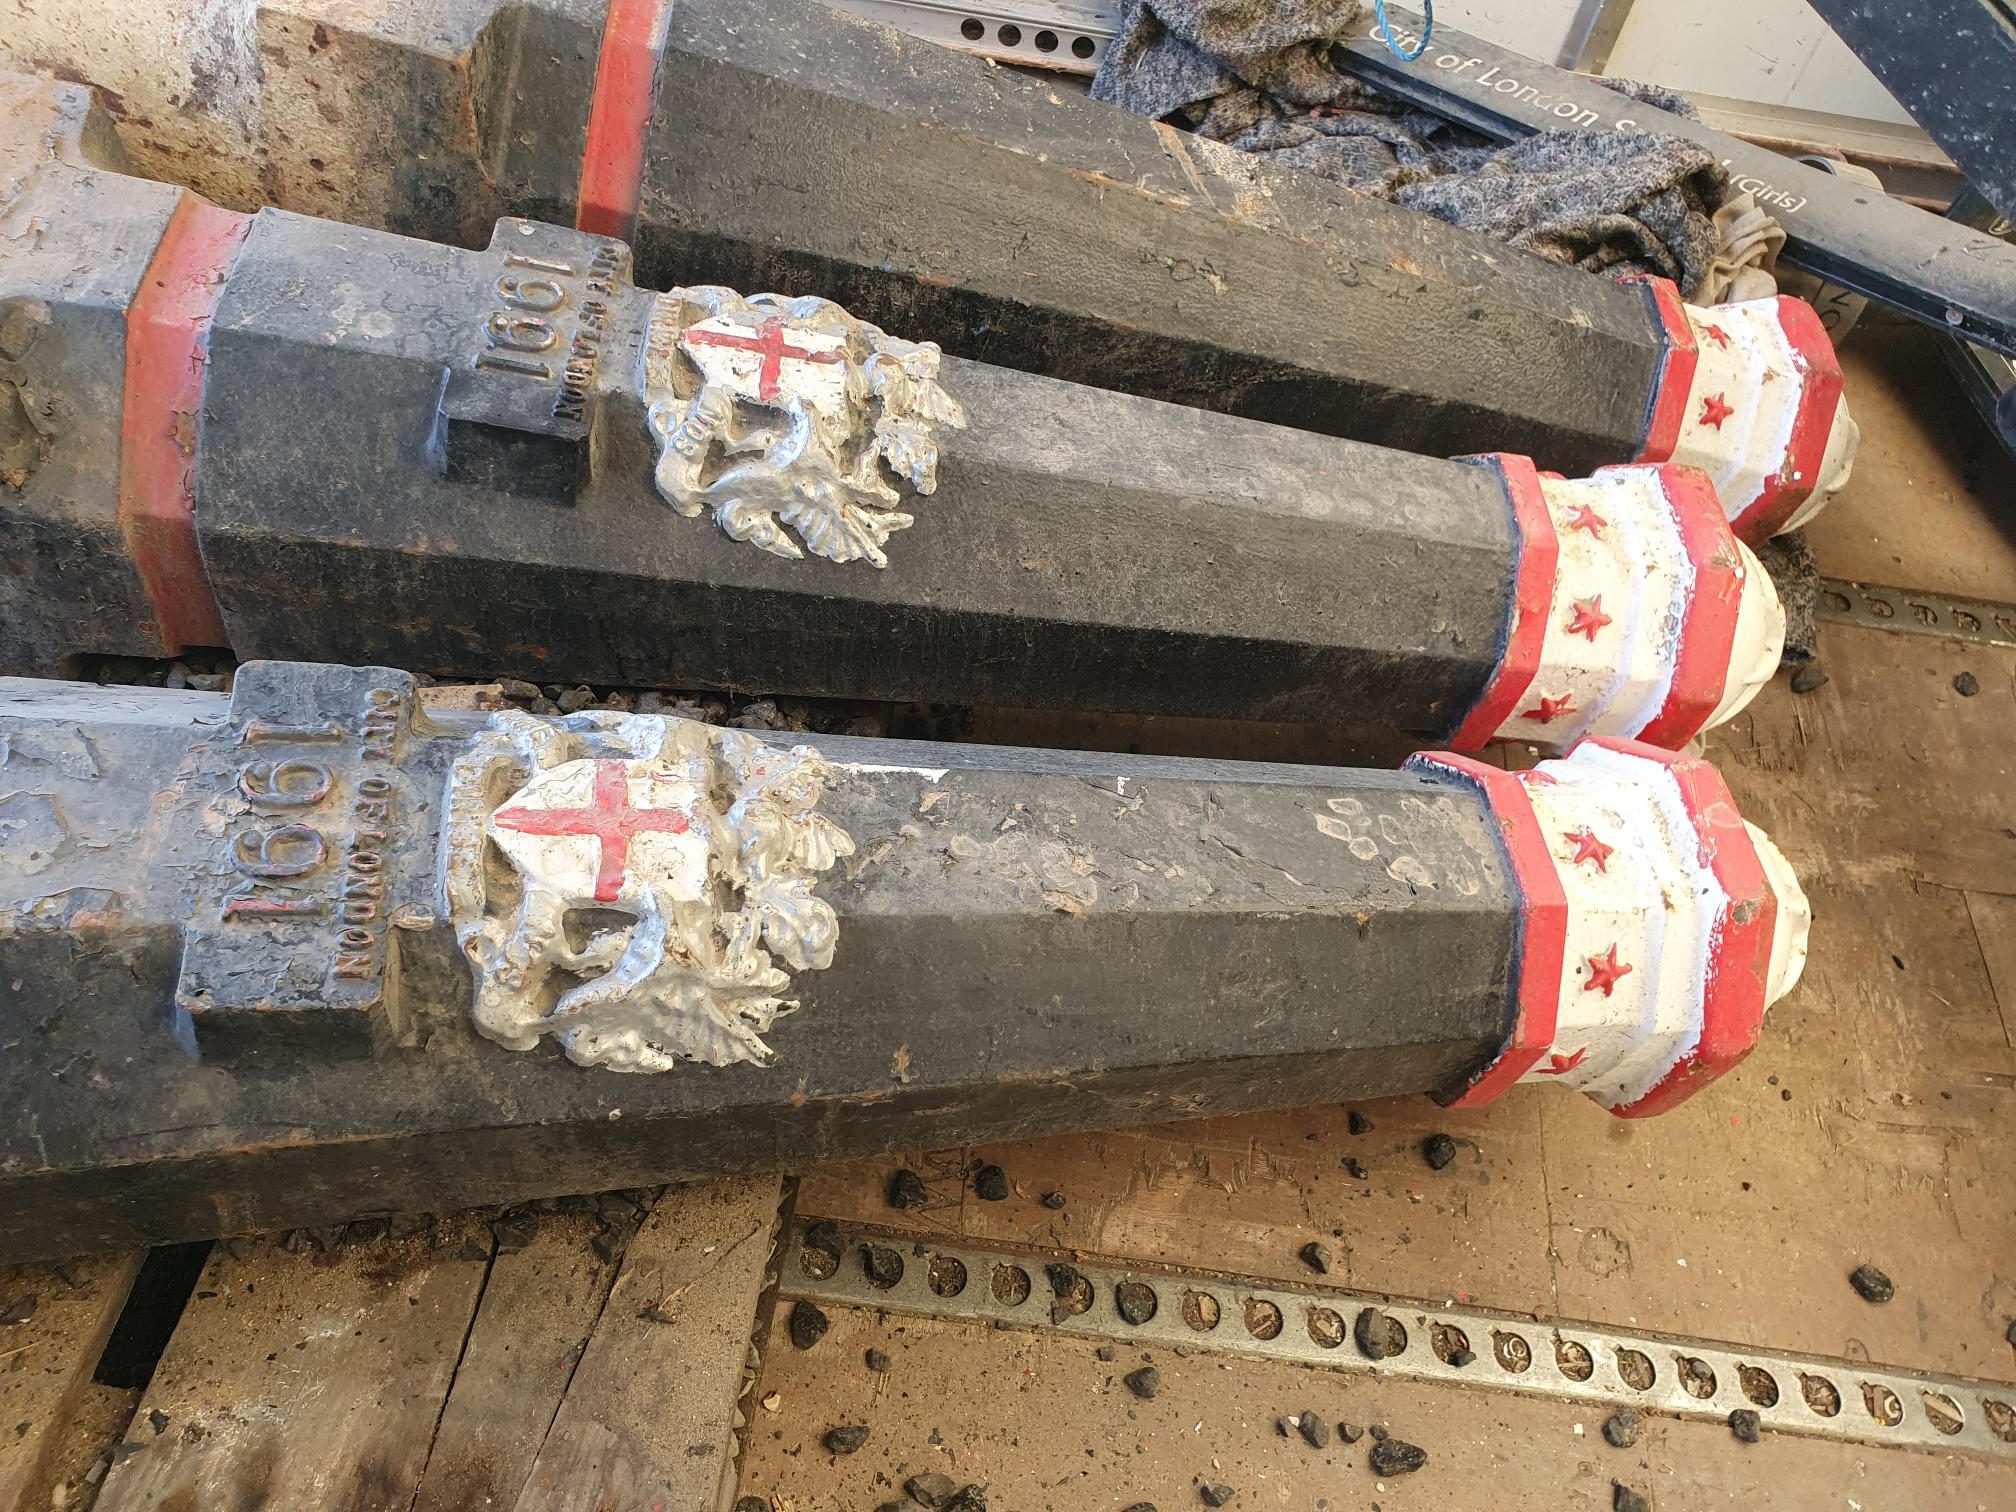 City of london Crested Bollards – Large Cast Iron – Very Rare to Find